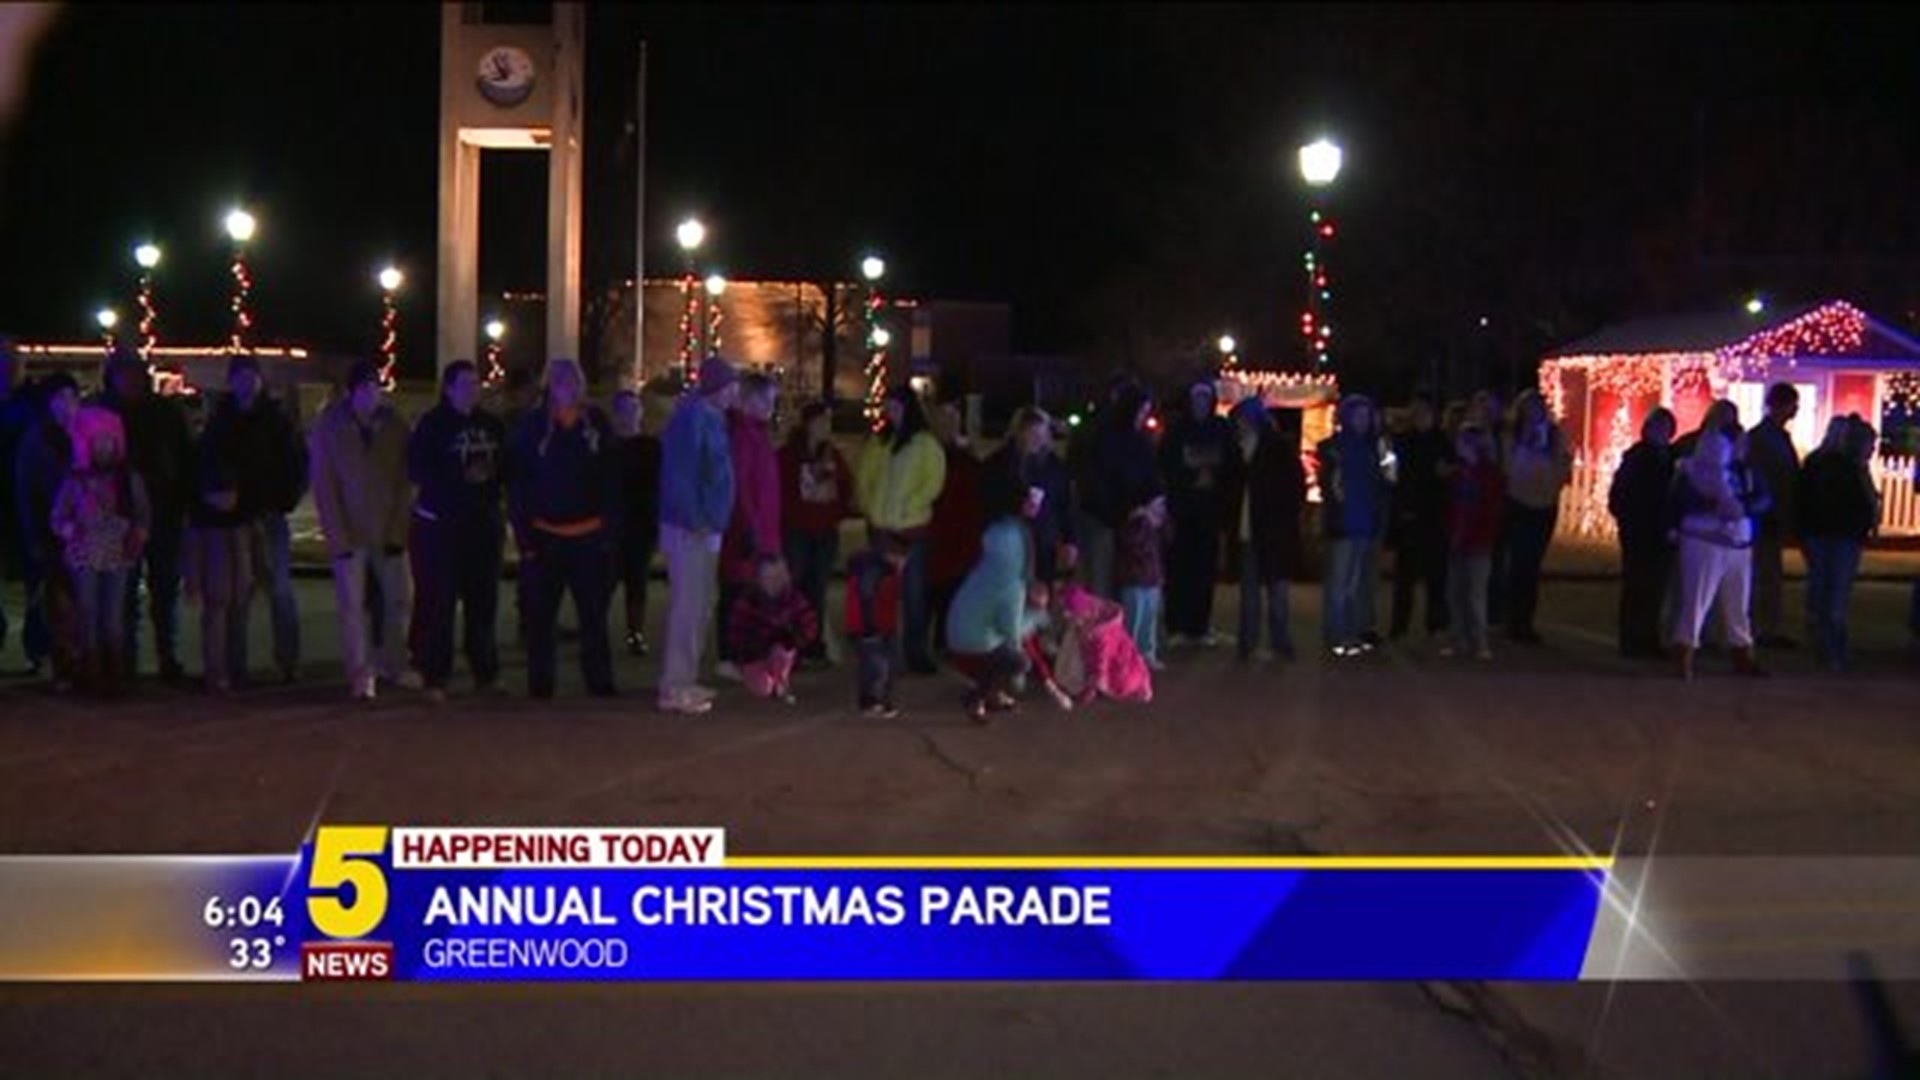 Annual Christmas Parade in Greenwood